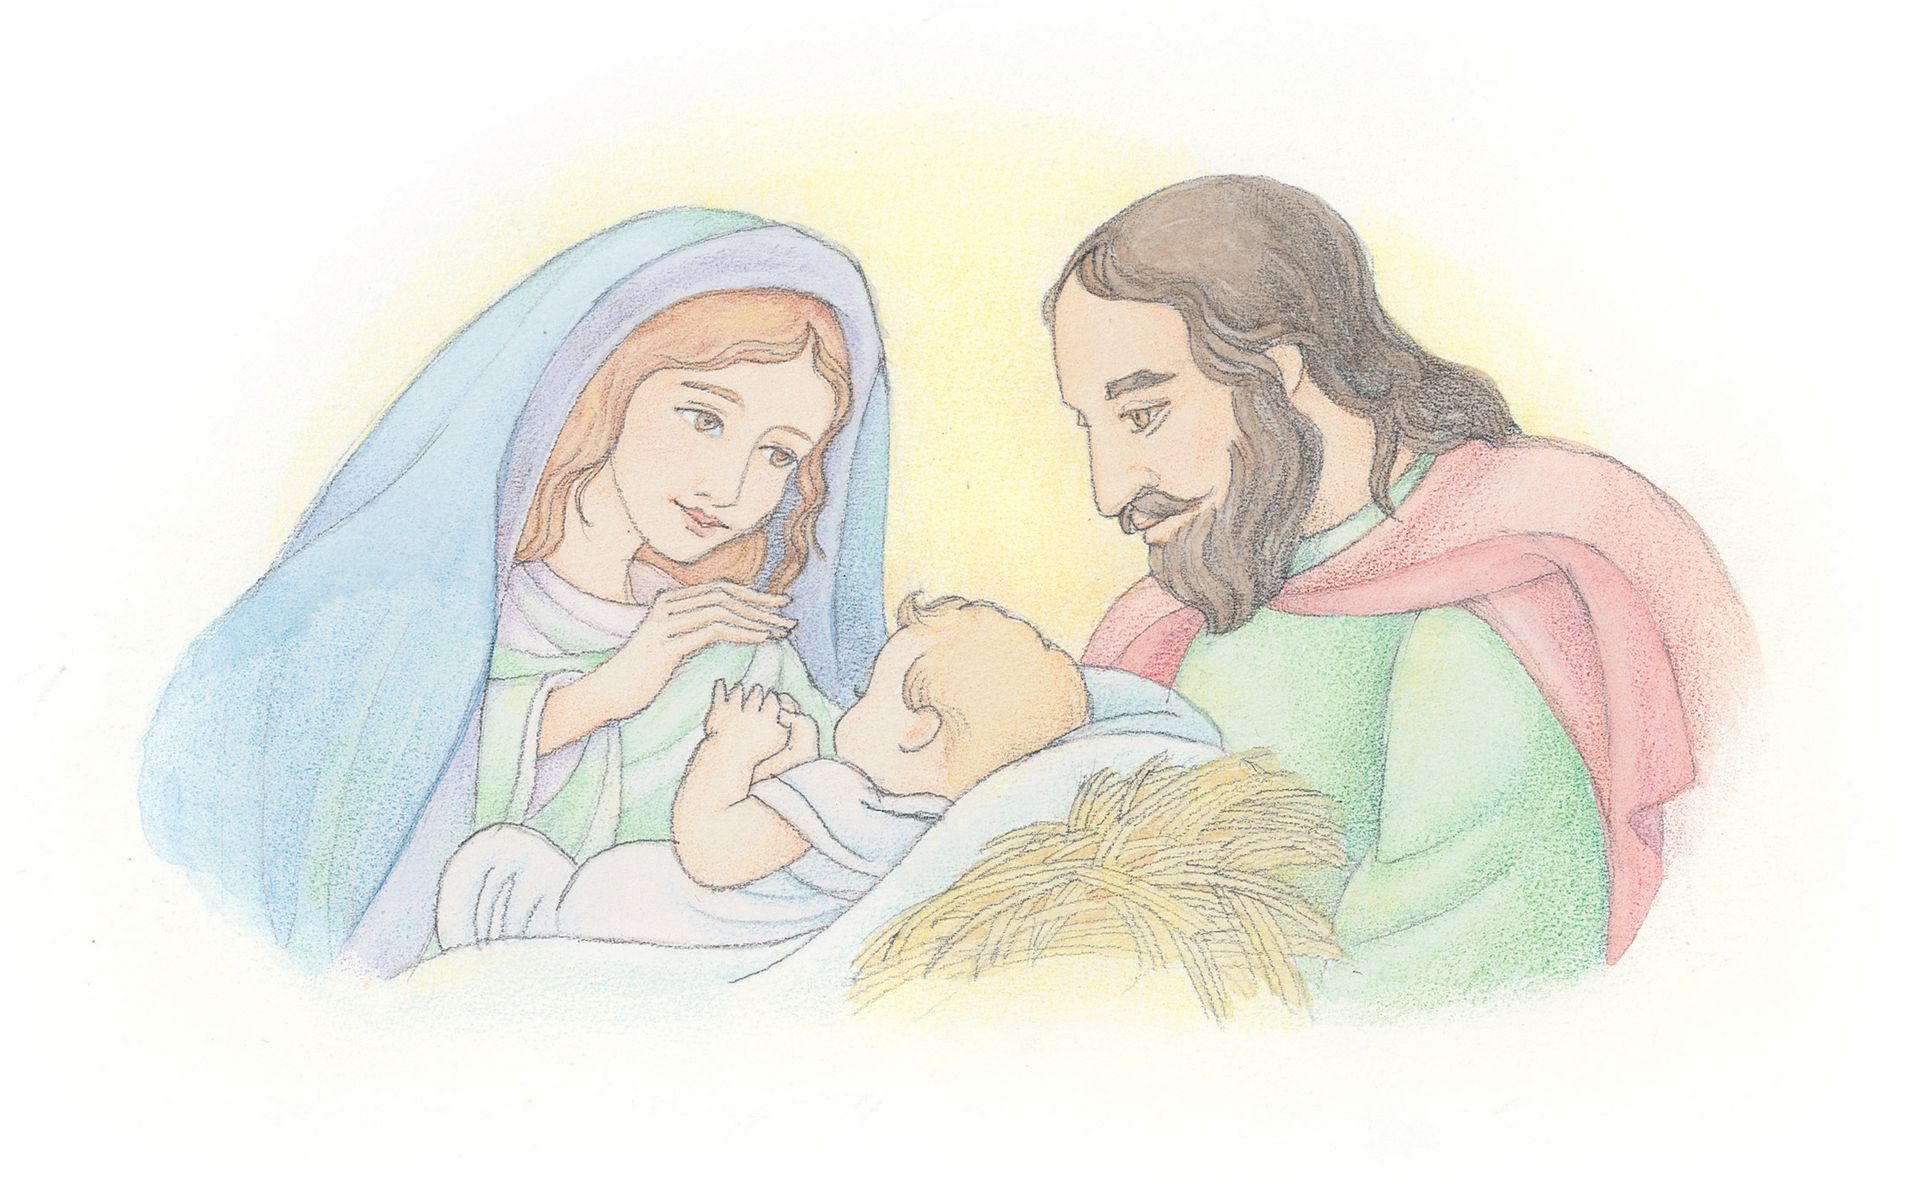 Mary and Joseph standing over baby Jesus. From the Children’s Songbook, page 46, “Who Is the Child?”; watercolor illustration by Phyllis Luch.